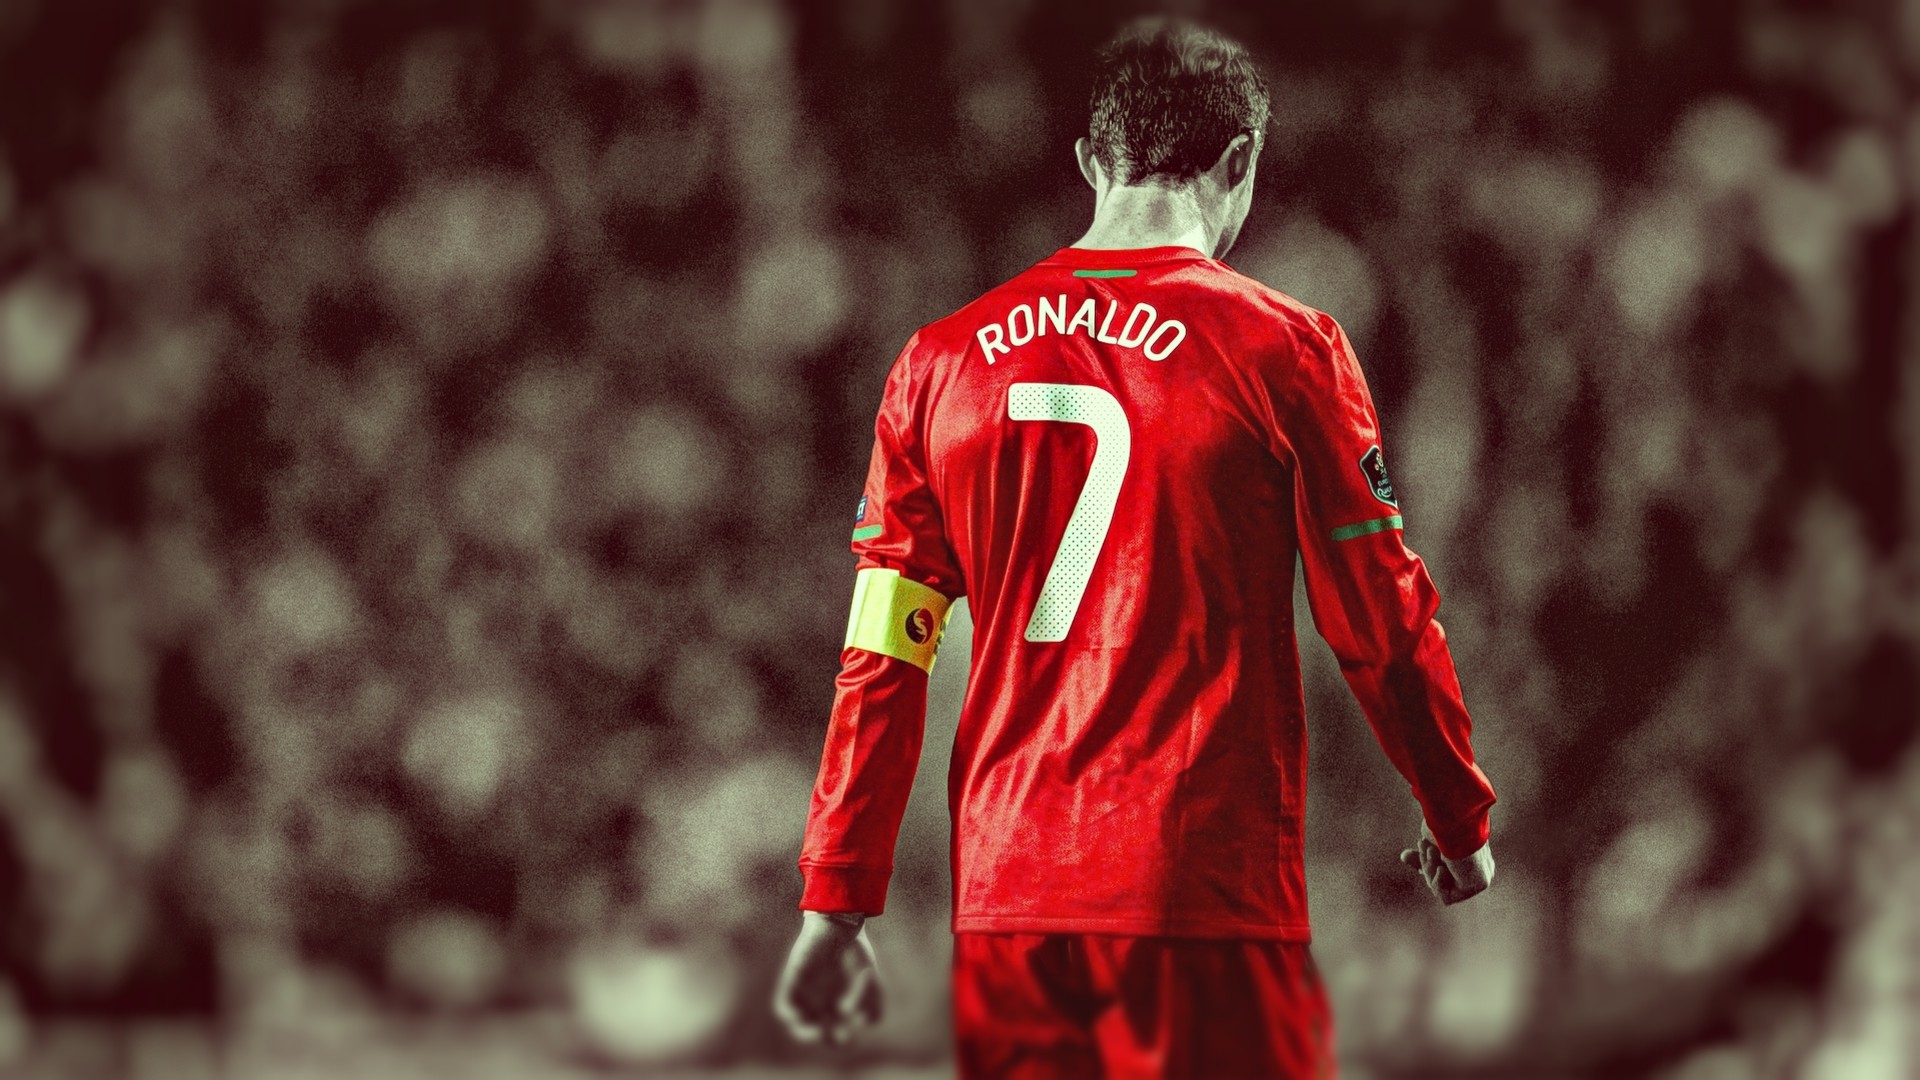 cr7 hd wallpapers 1080p,red,football player,player,soccer player,sportswear